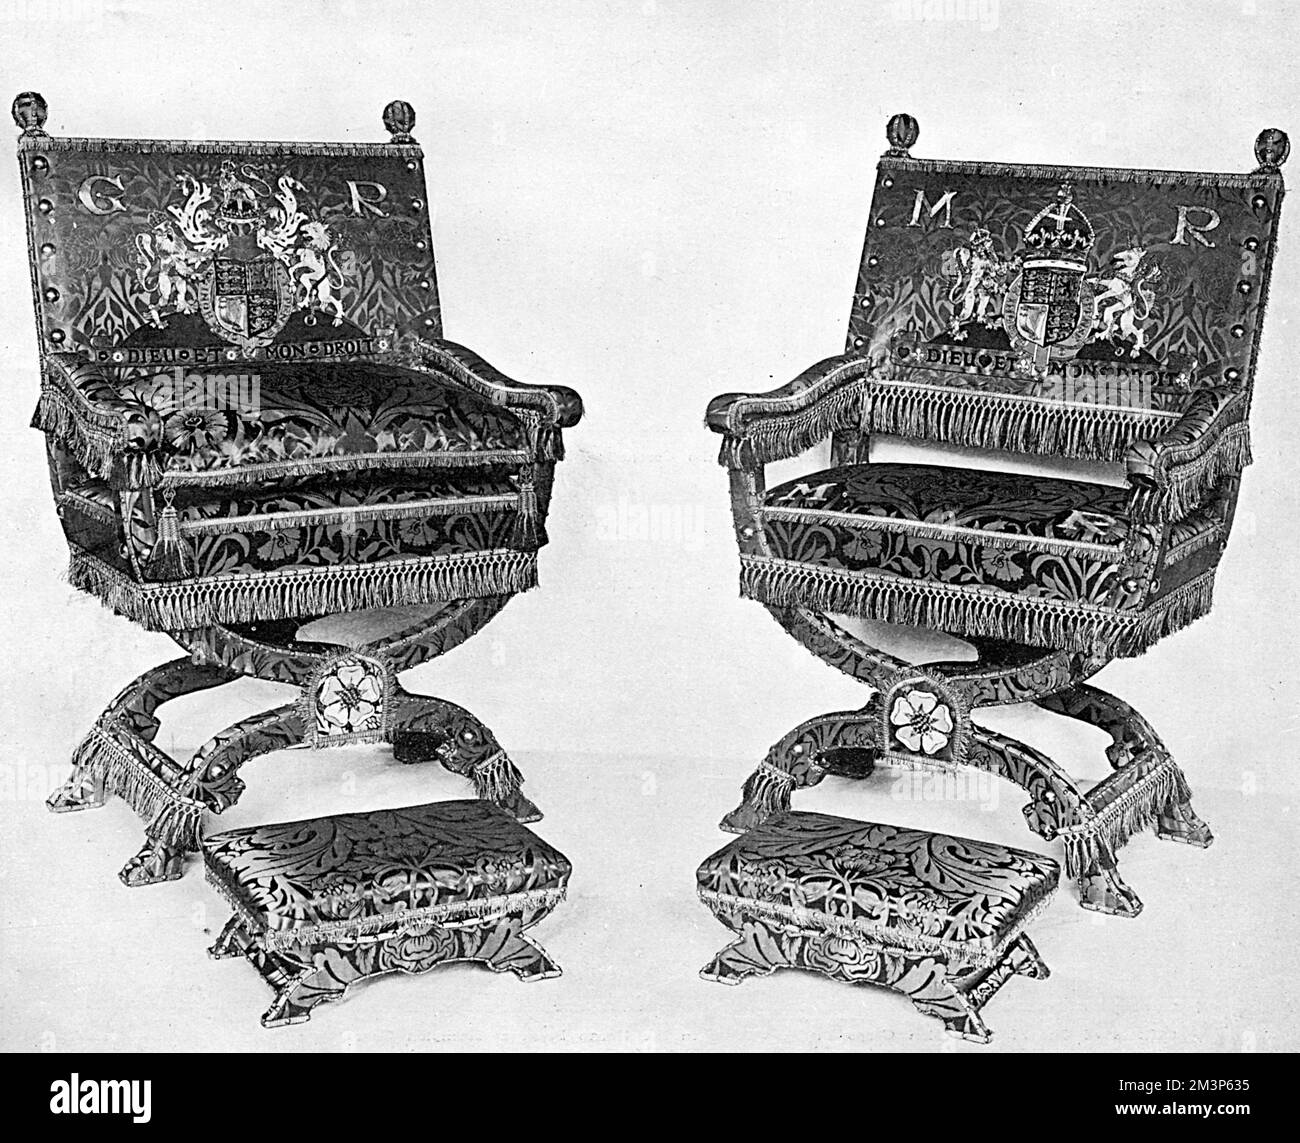 The thrones used for the enthronisation stage of the ceremony during the coronation of King George V in June 1911.  These would be used following the crowning of the King on St. Edward's Chair and differ for each coronation.  This pair were reproduced by Messrs Morris (William Morris) from Jacobean originals from Knole with an X-shaped back supports of beechwood and upholstery of crimson silk damask specially designed by William Morris some years before.  The silk was dyed with pure madder and woven on the Morris looms at Merton Abbey.     Date: 1911 Stock Photo